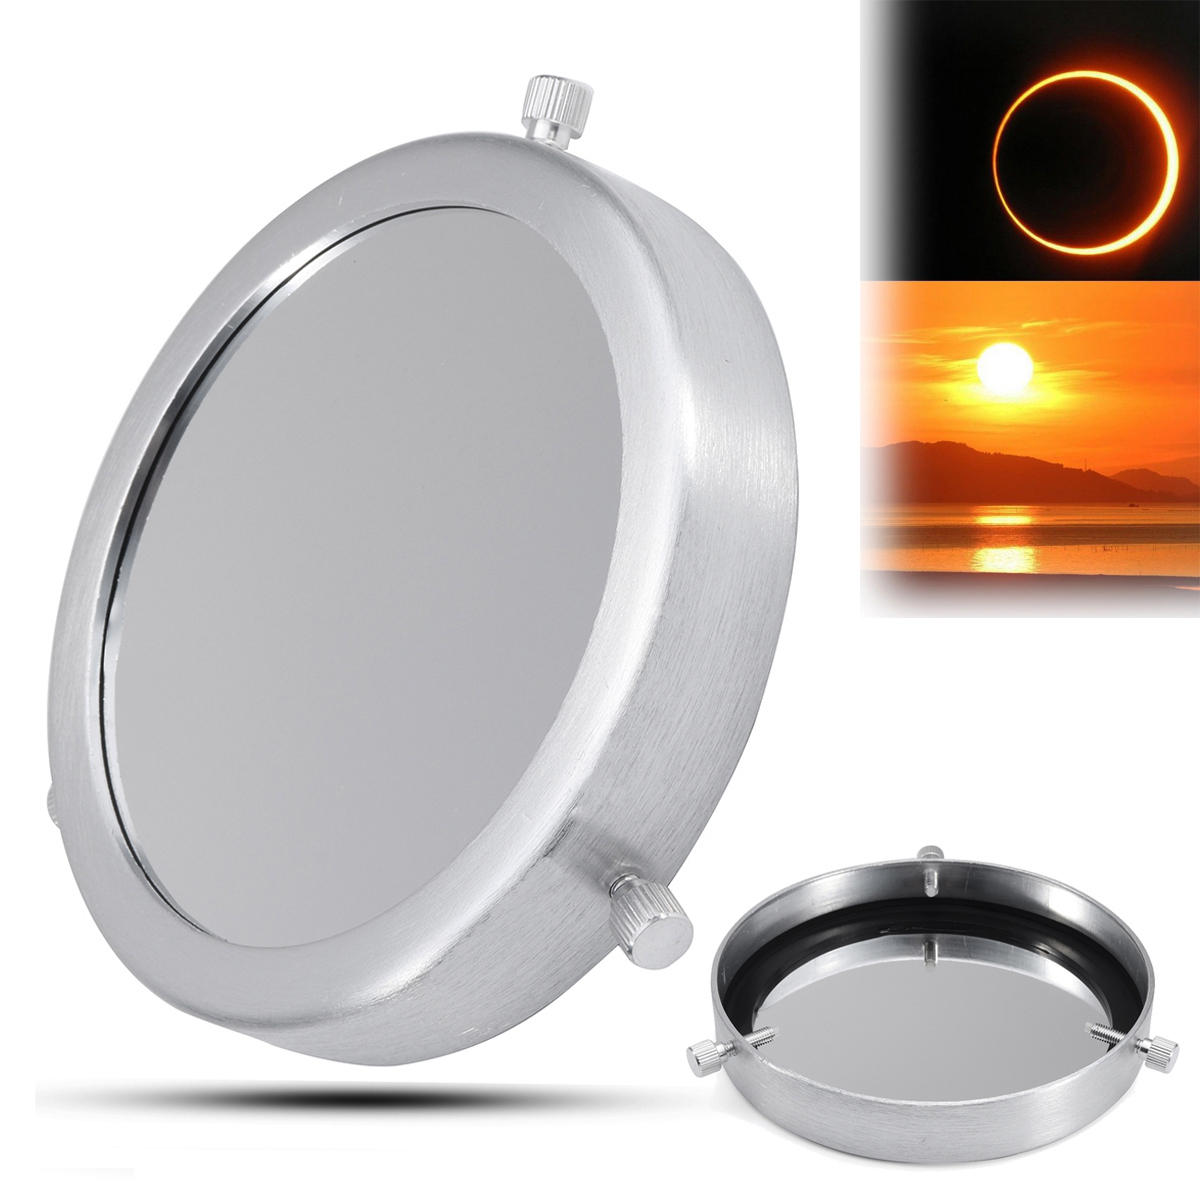 Silver 70-92mm Solar Filter Baader Film Metal Cover For Astronomical Telescope